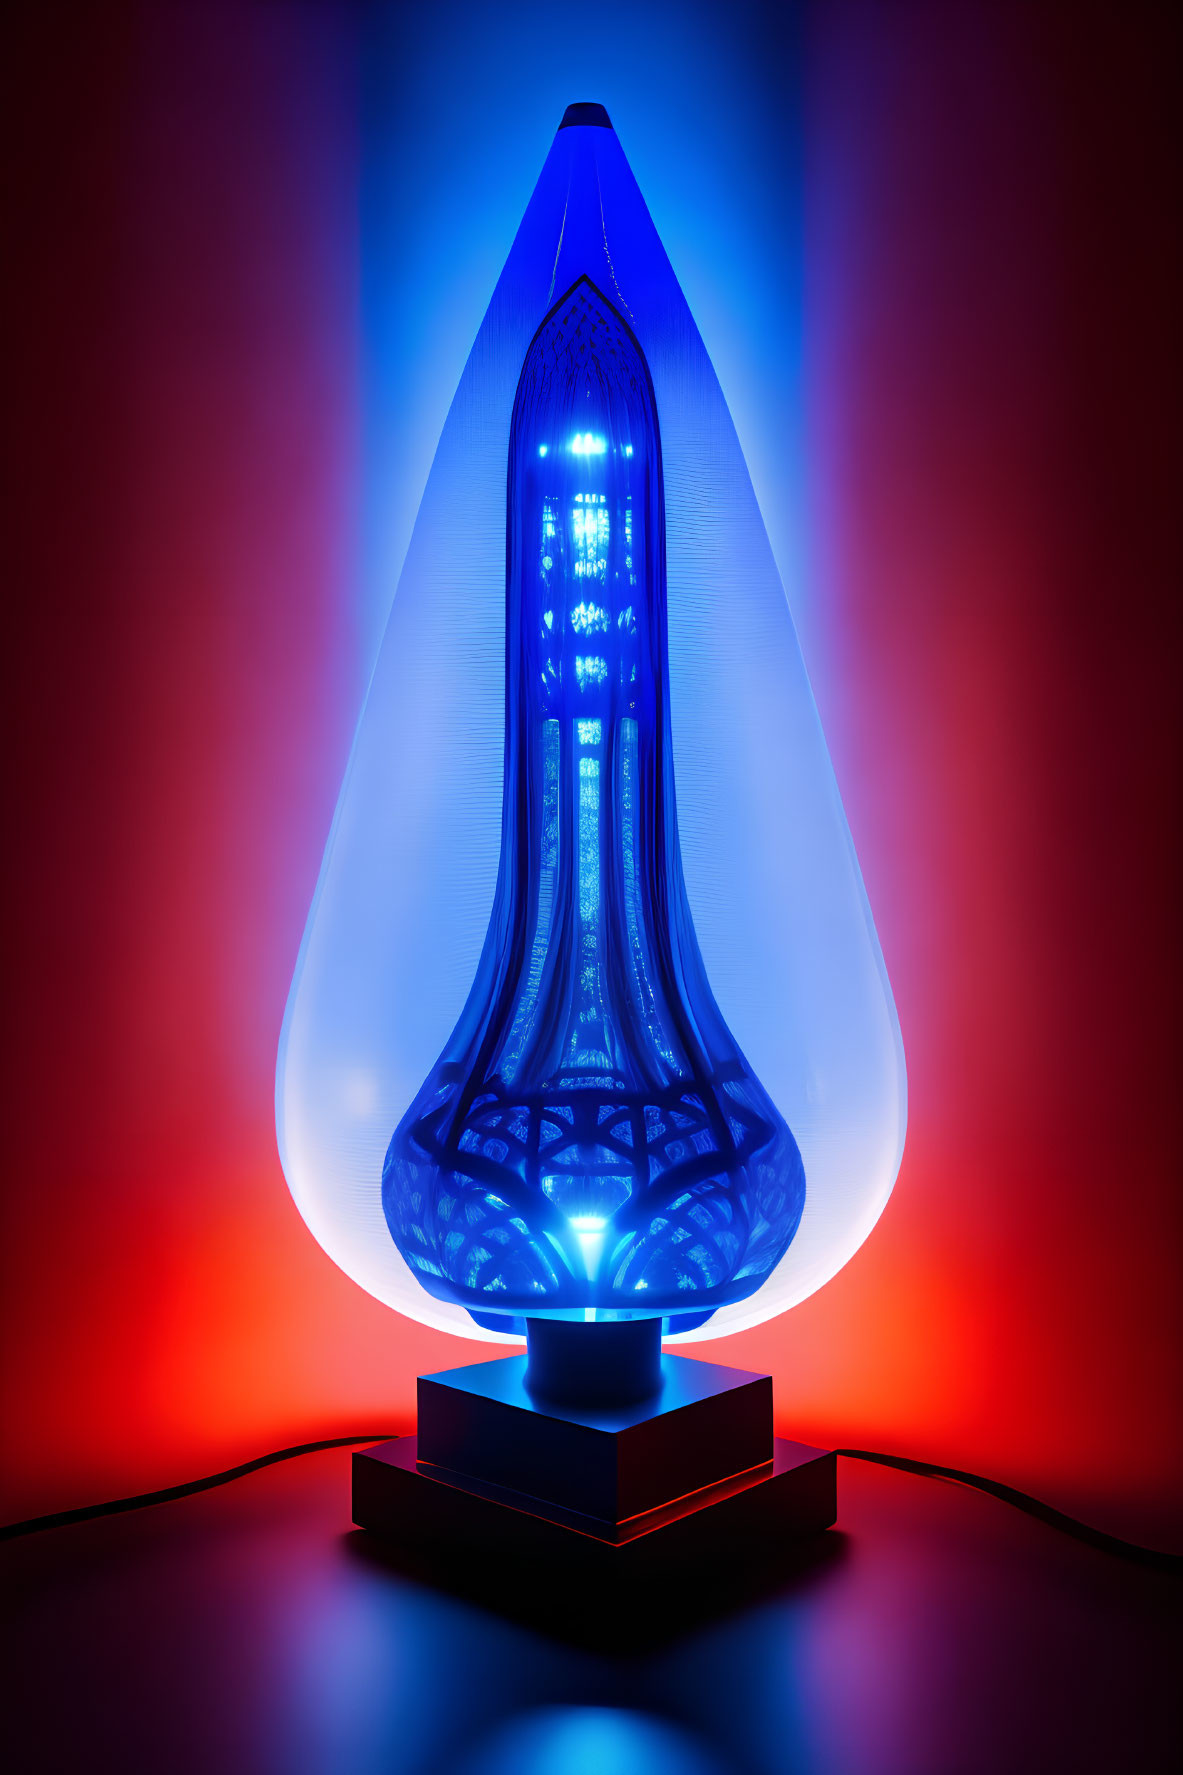 Vibrant blue lava lamp on red and blue gradient background